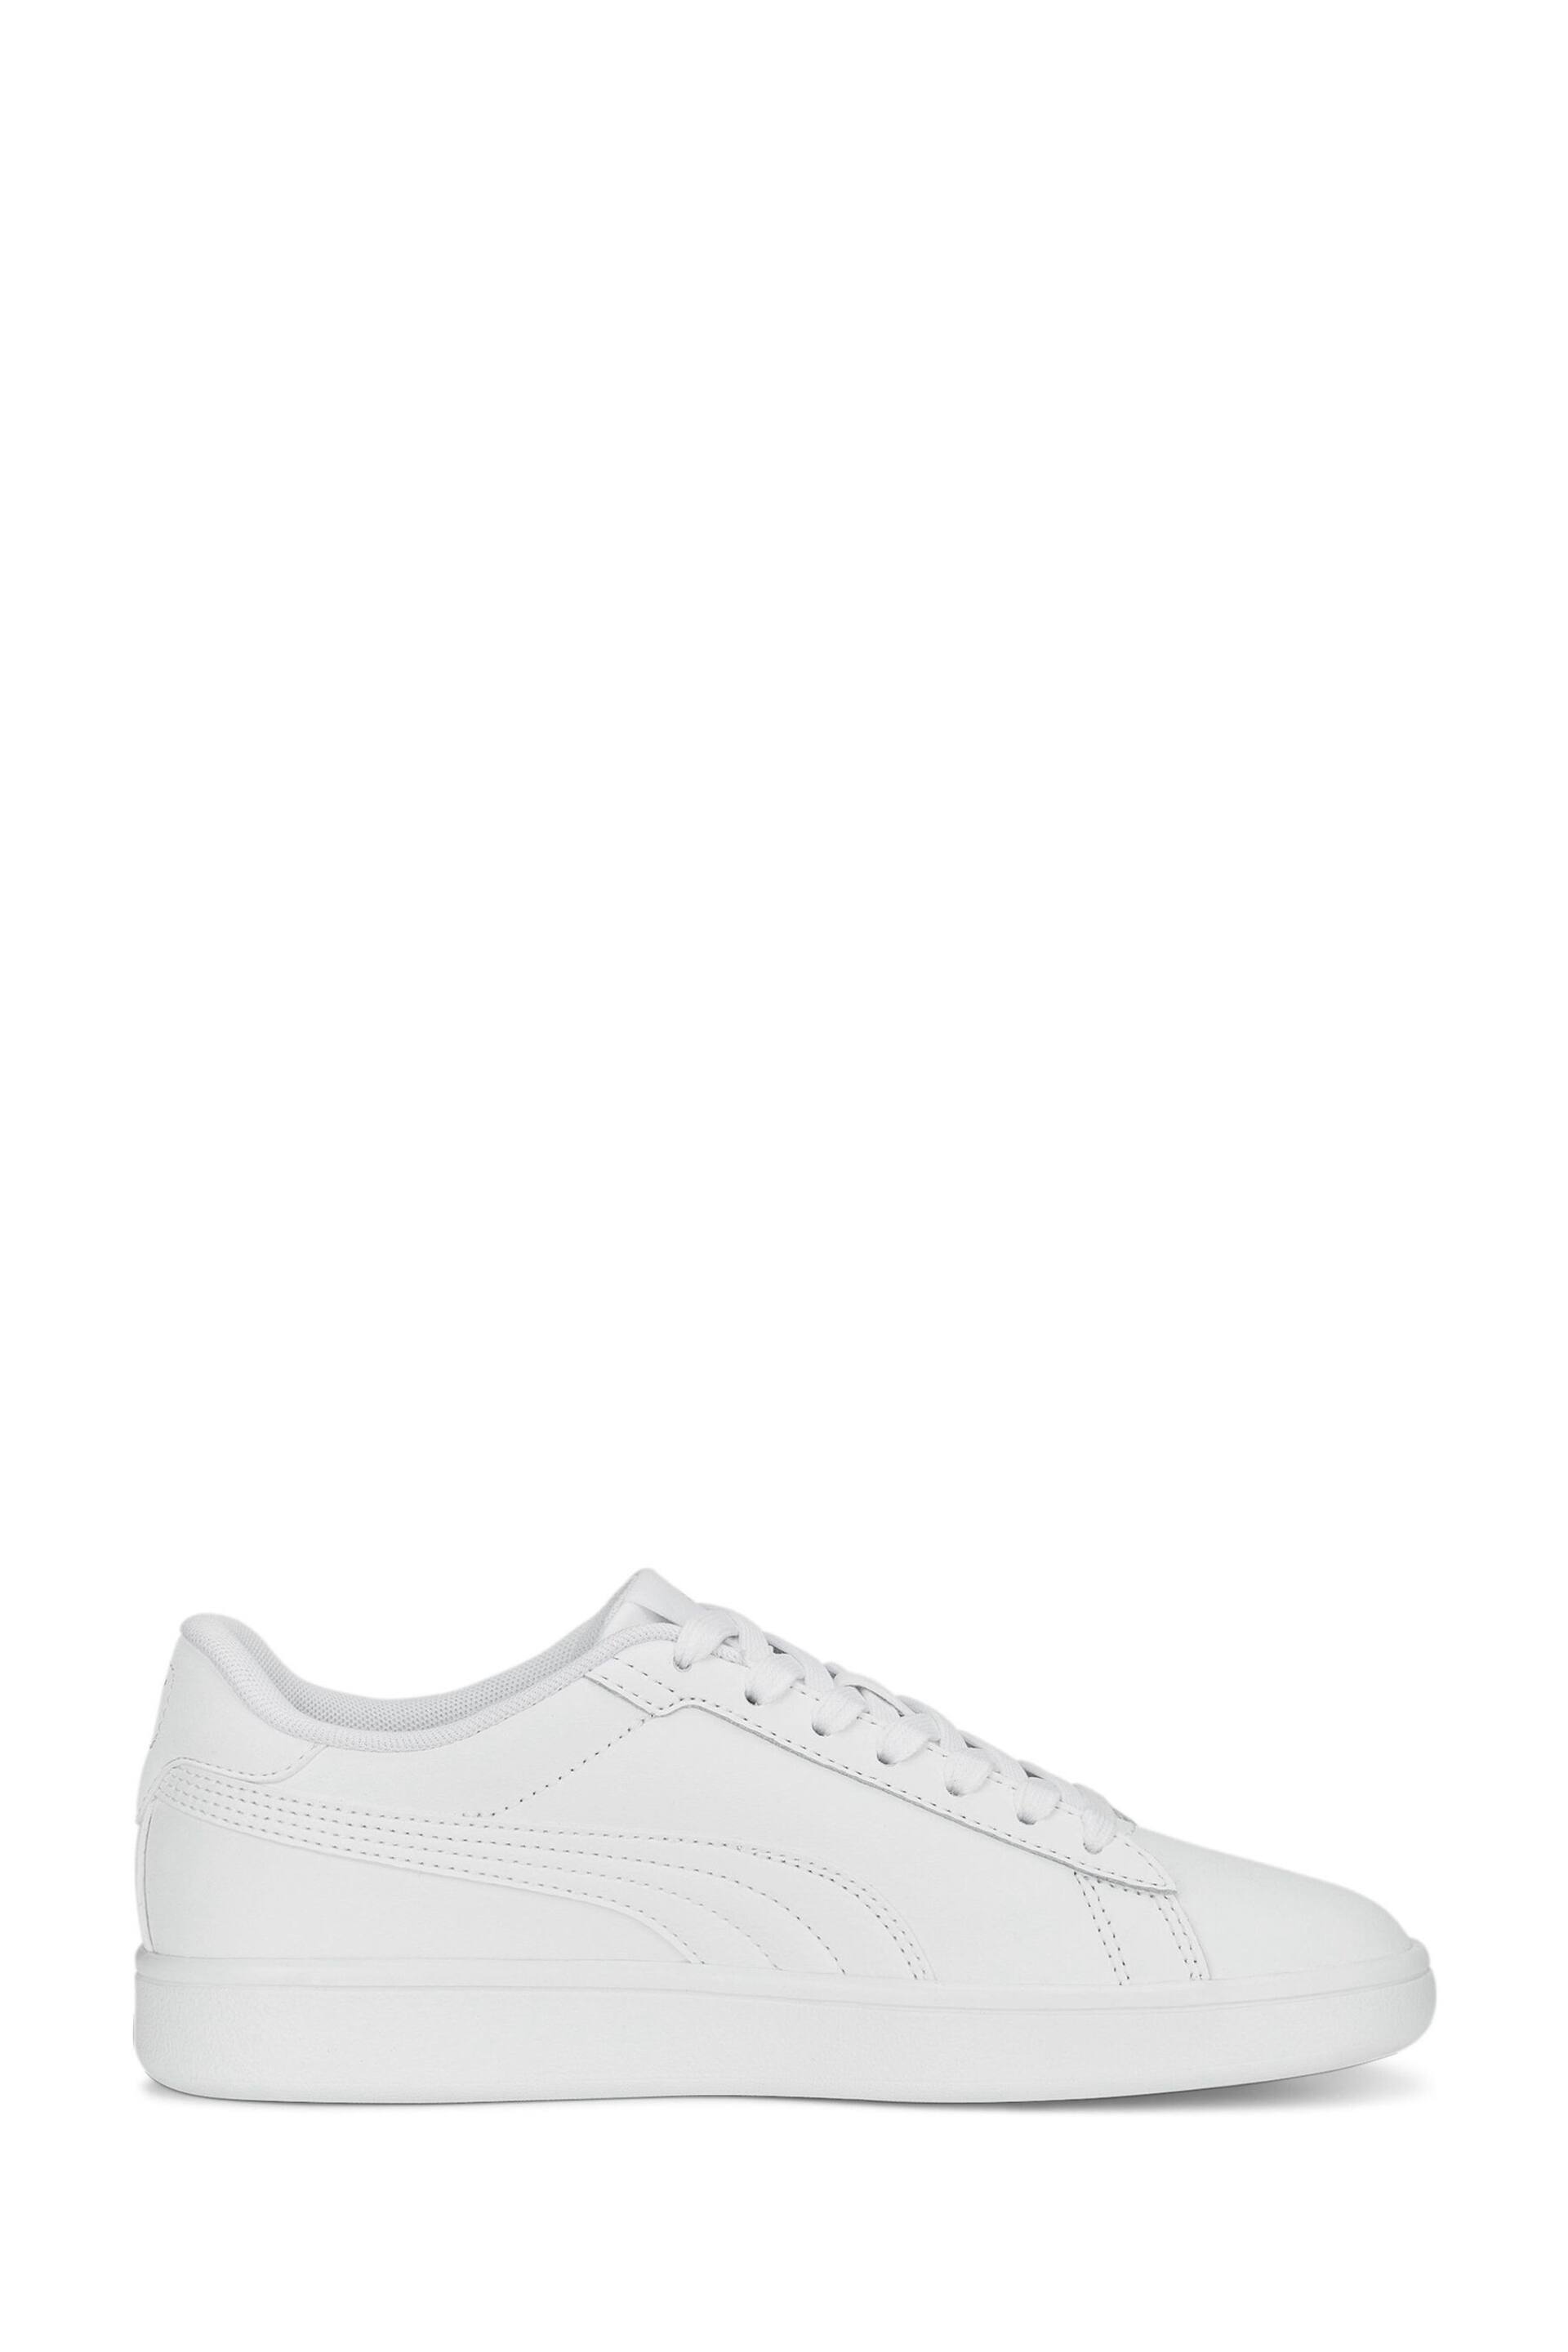 Puma White Smash 3.0 Leather Youth Trainers - Image 1 of 6